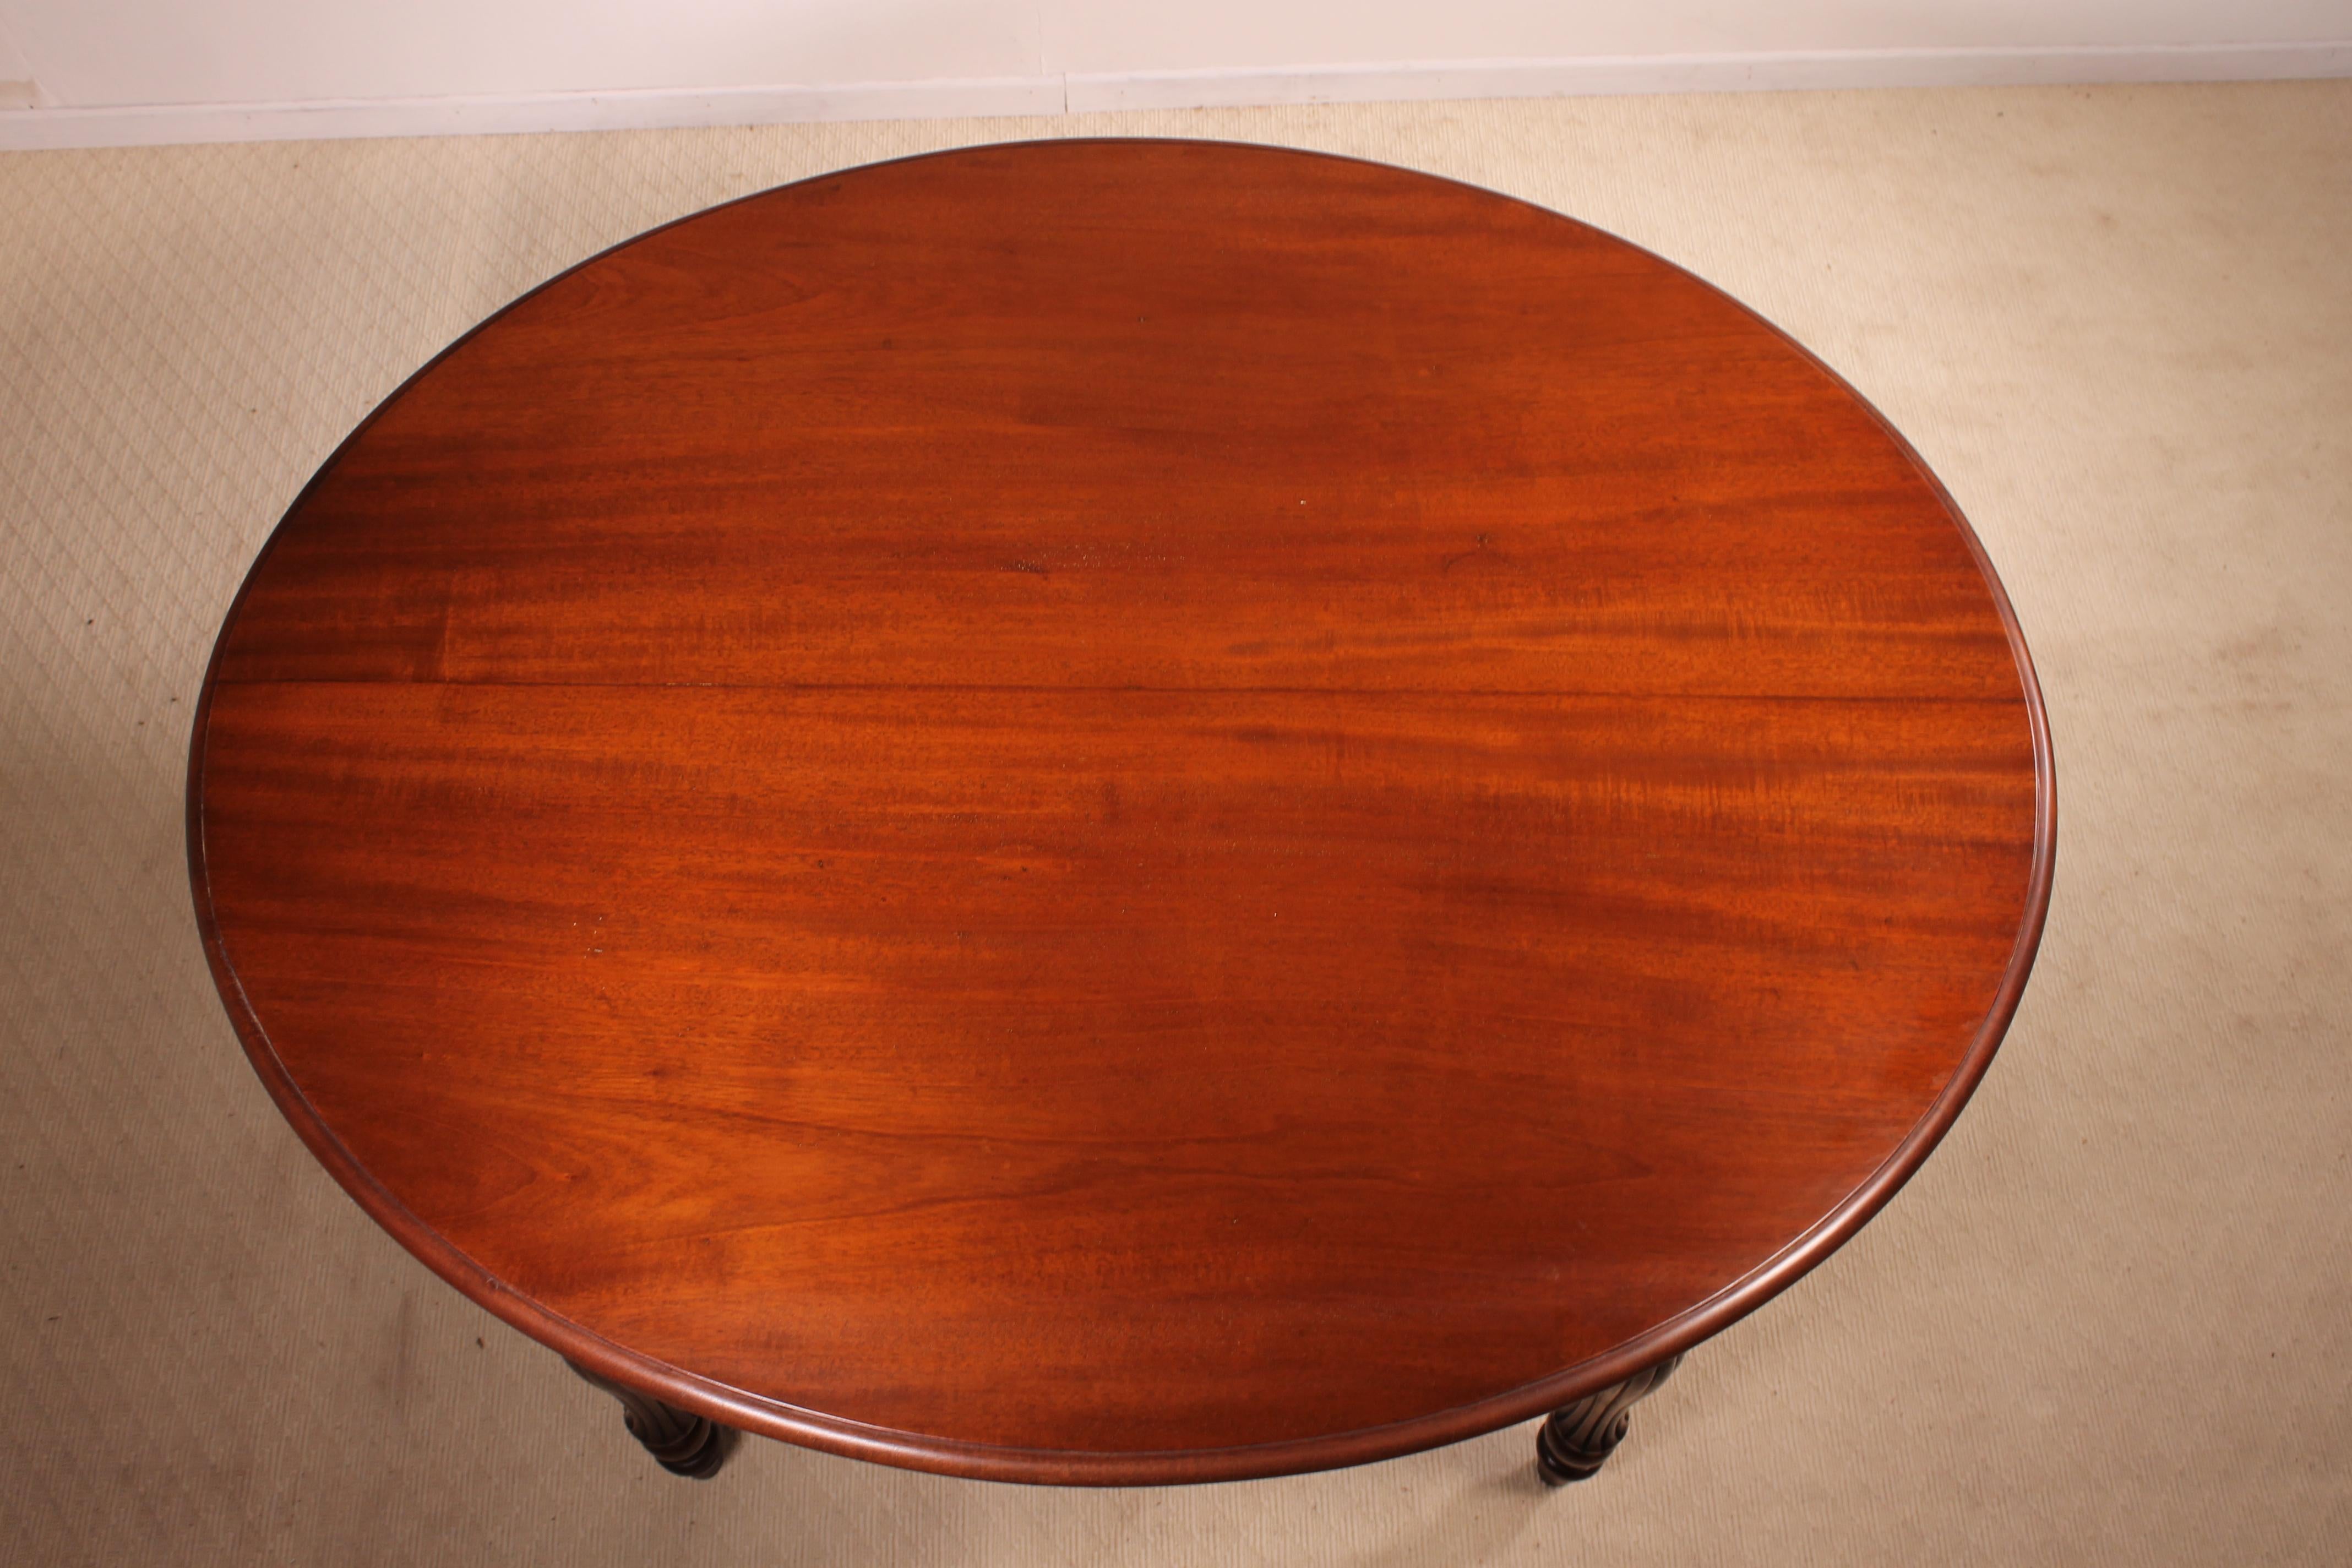 Beautiful French 19th century dining table with an elliptical shape. This fine table with a massif mahogany tabletop has a very interesting shape and is in perfect condition. Very beautiful flamed frieze.
The table was hand polished in our